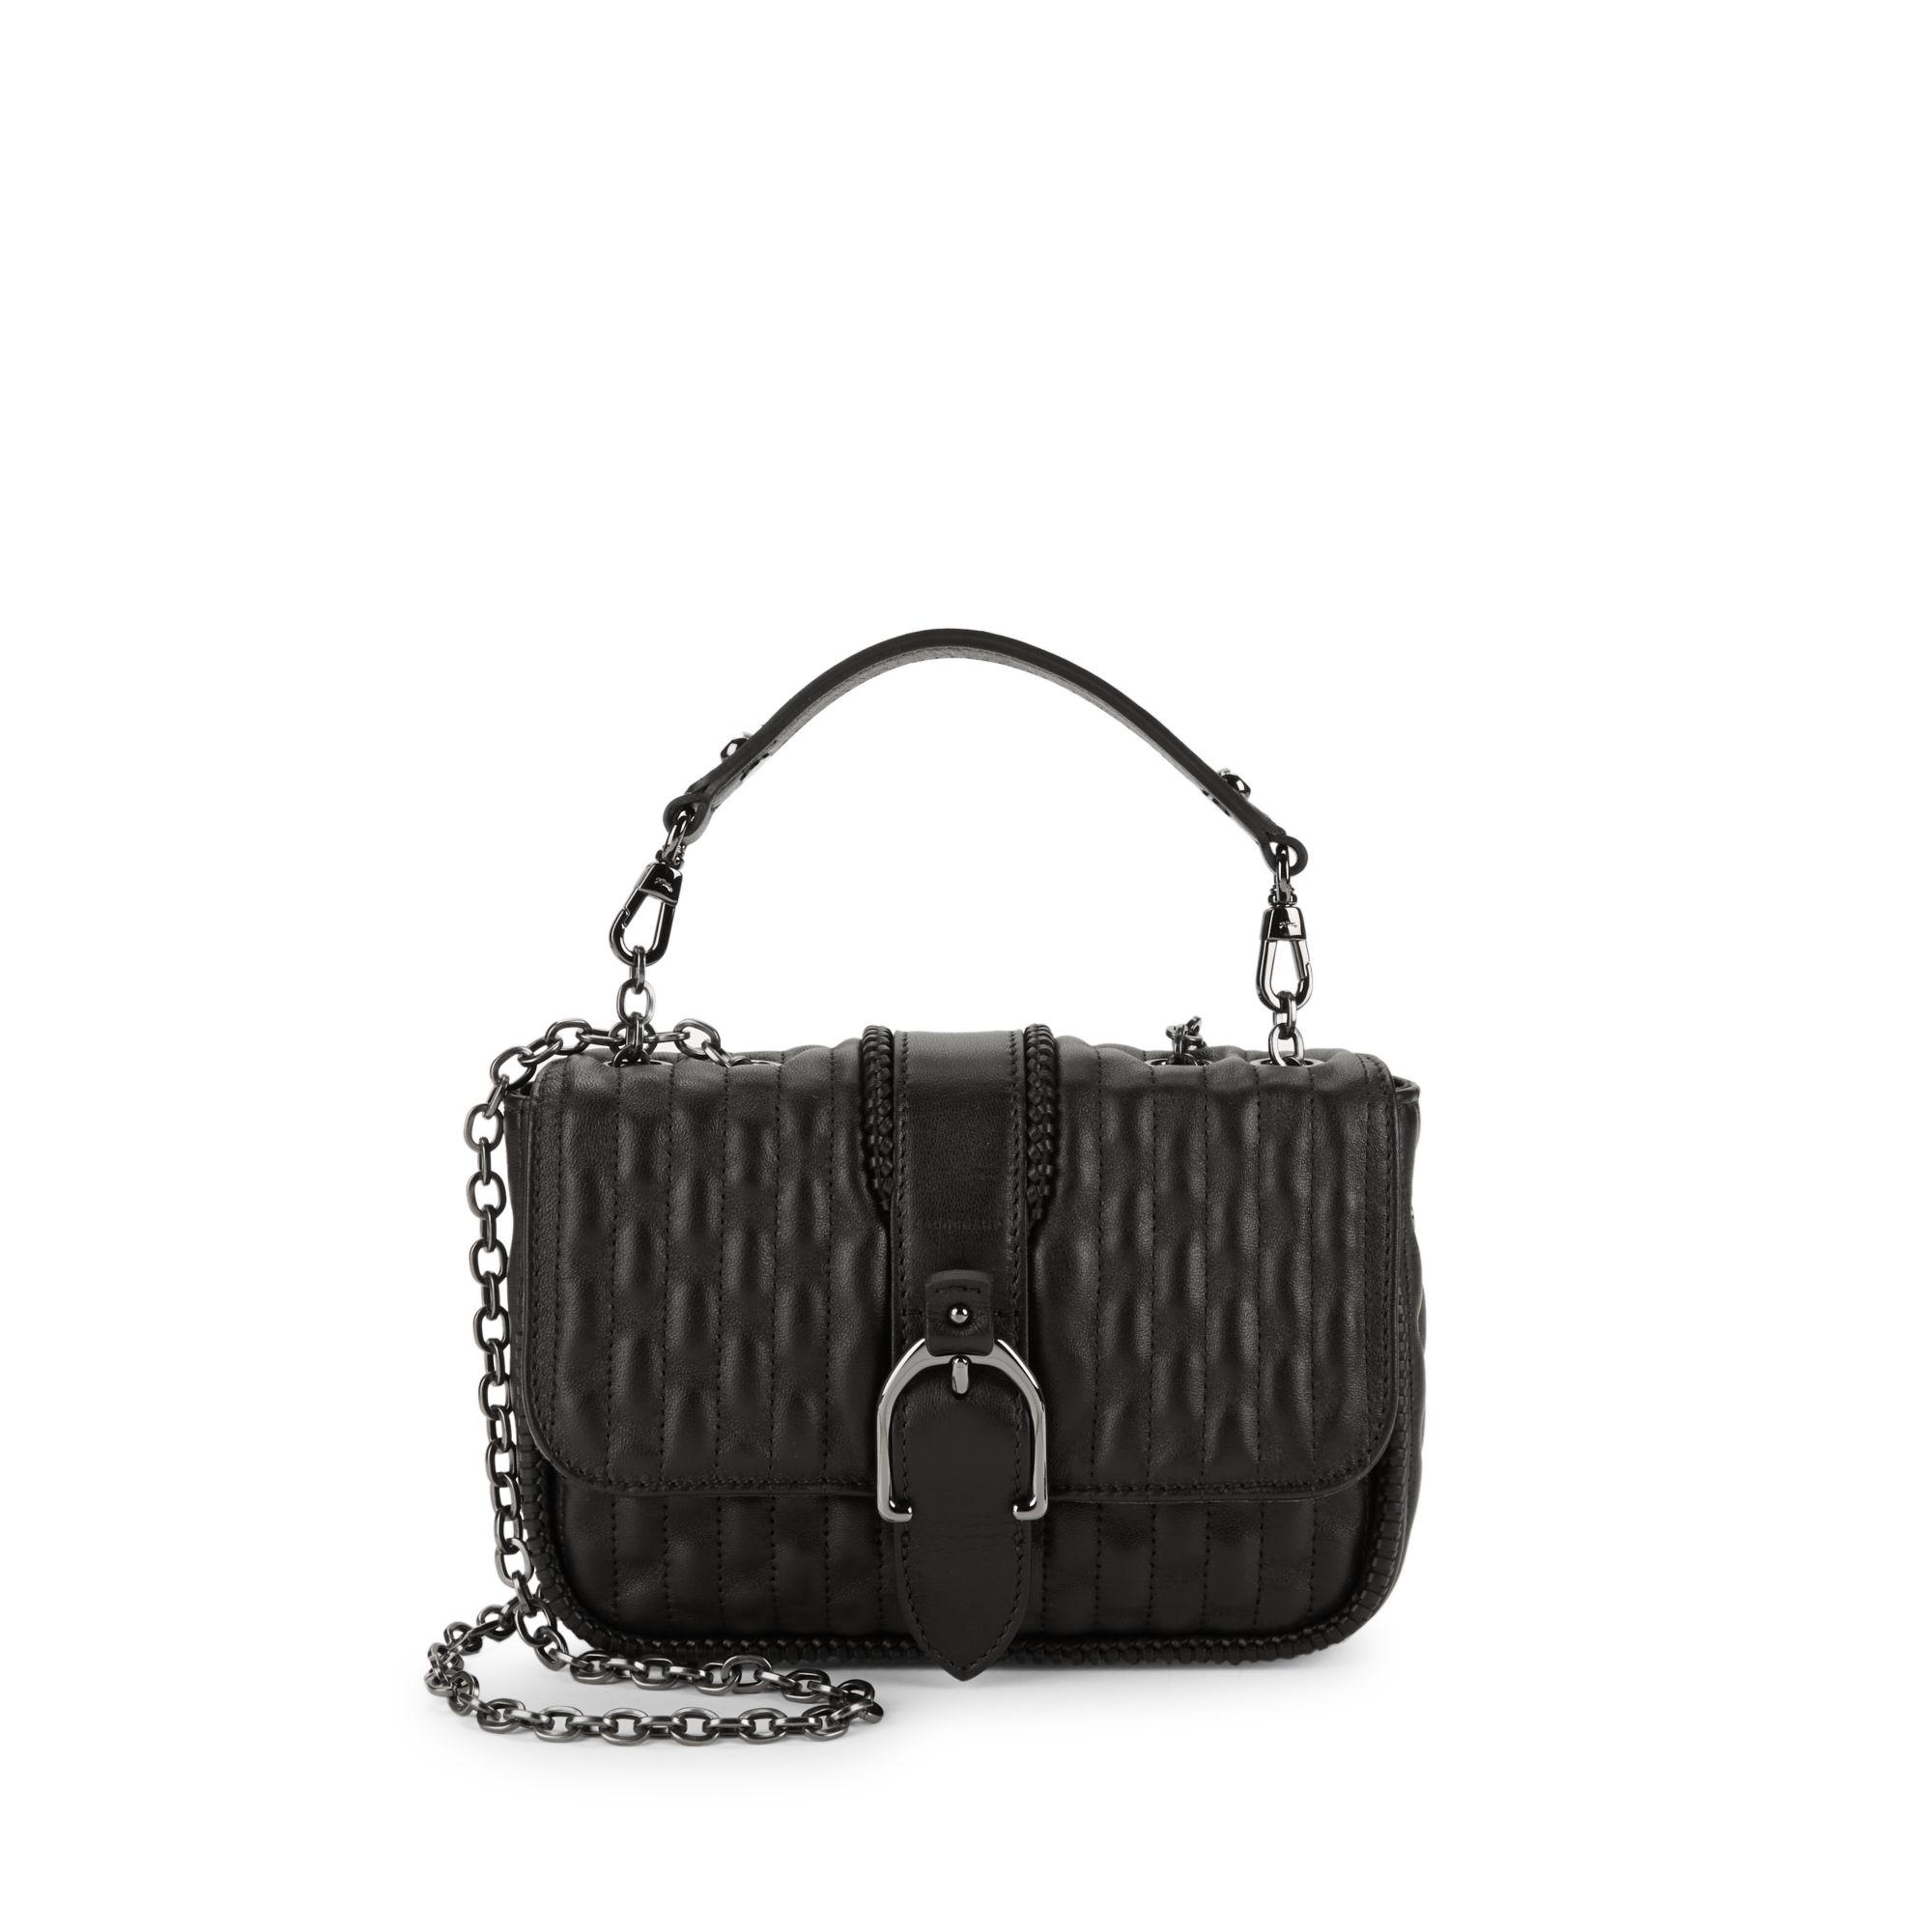 Longchamp Quilted Leather Crossbody Bag in Black - Lyst